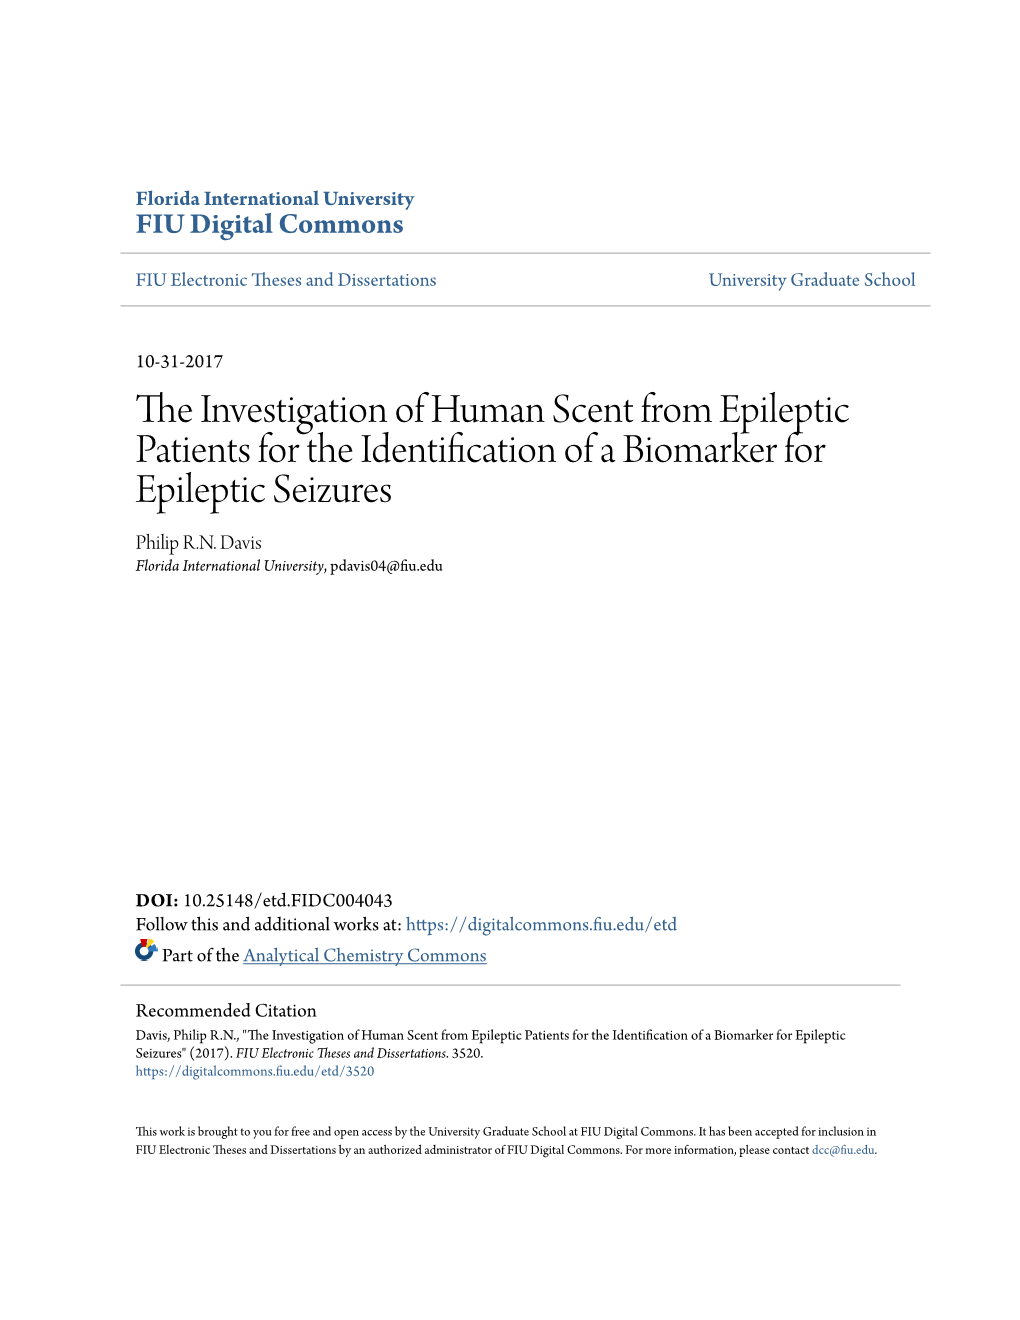 The Investigation of Human Scent from Epileptic Patients for The